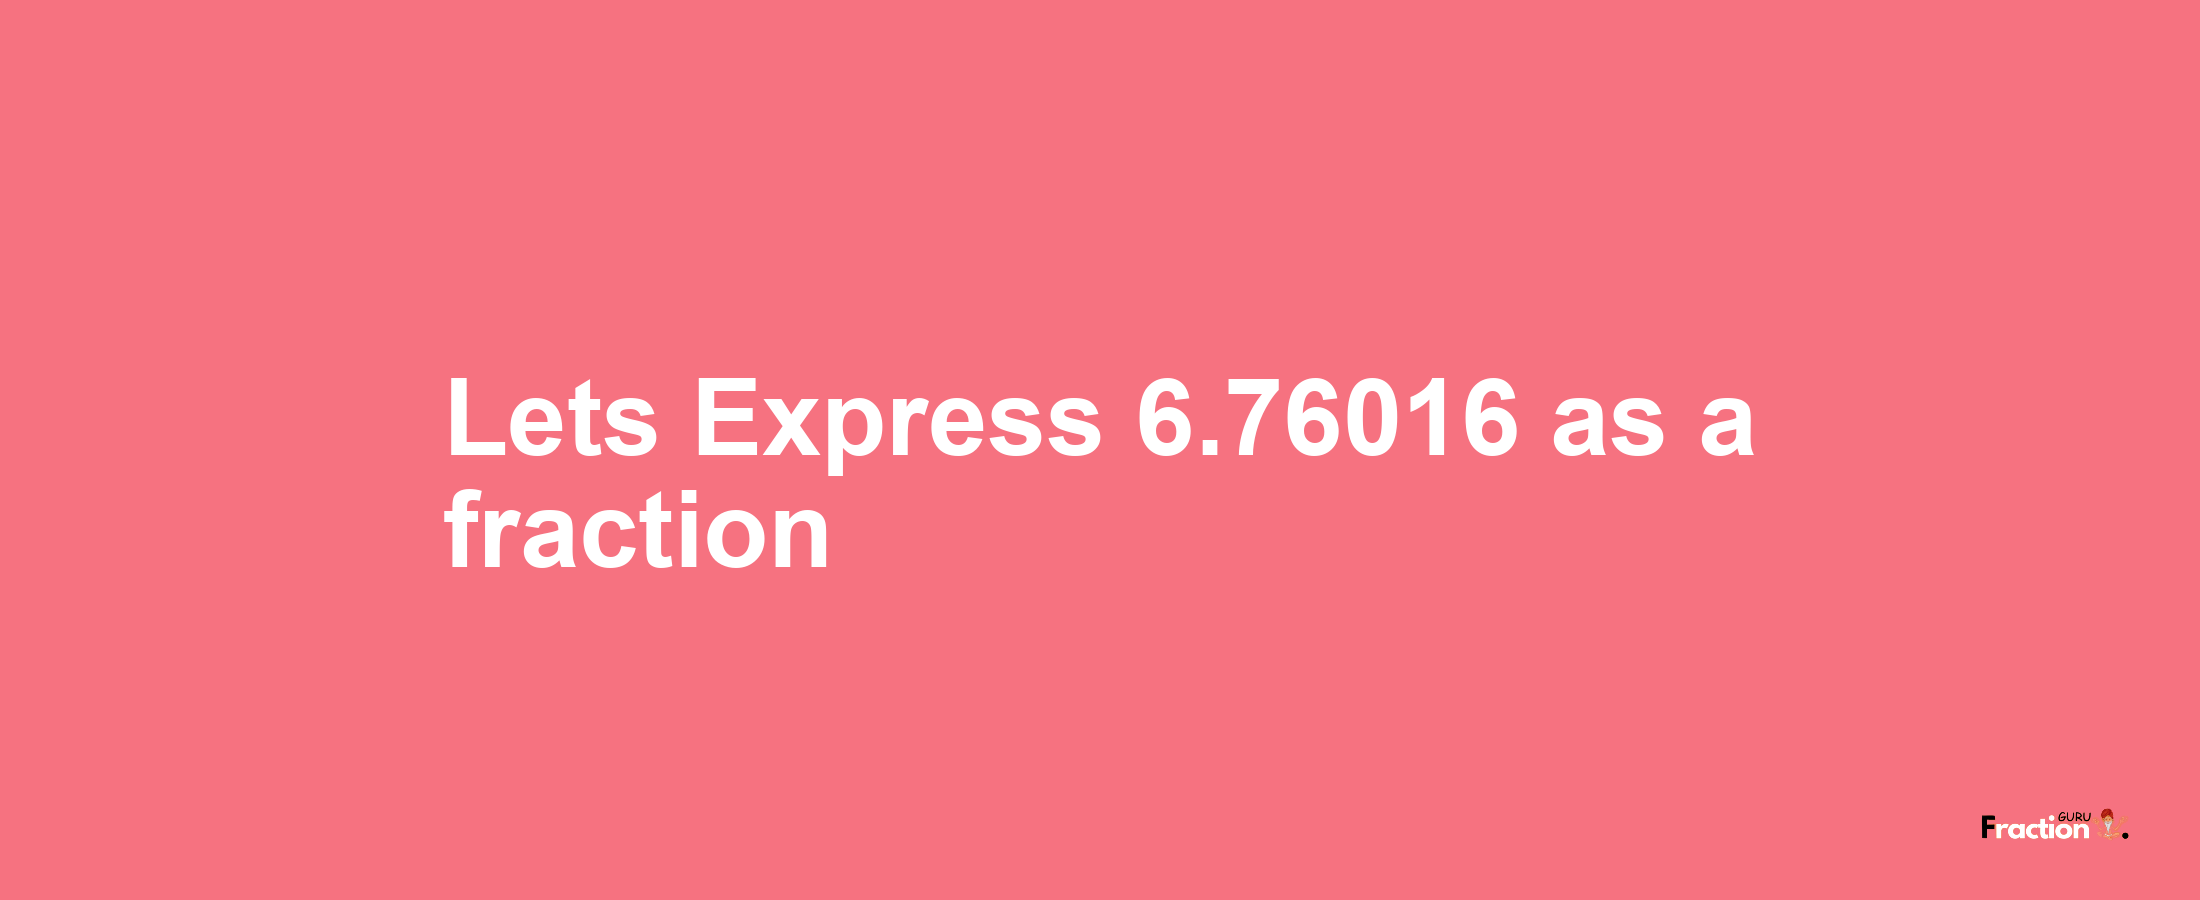 Lets Express 6.76016 as afraction